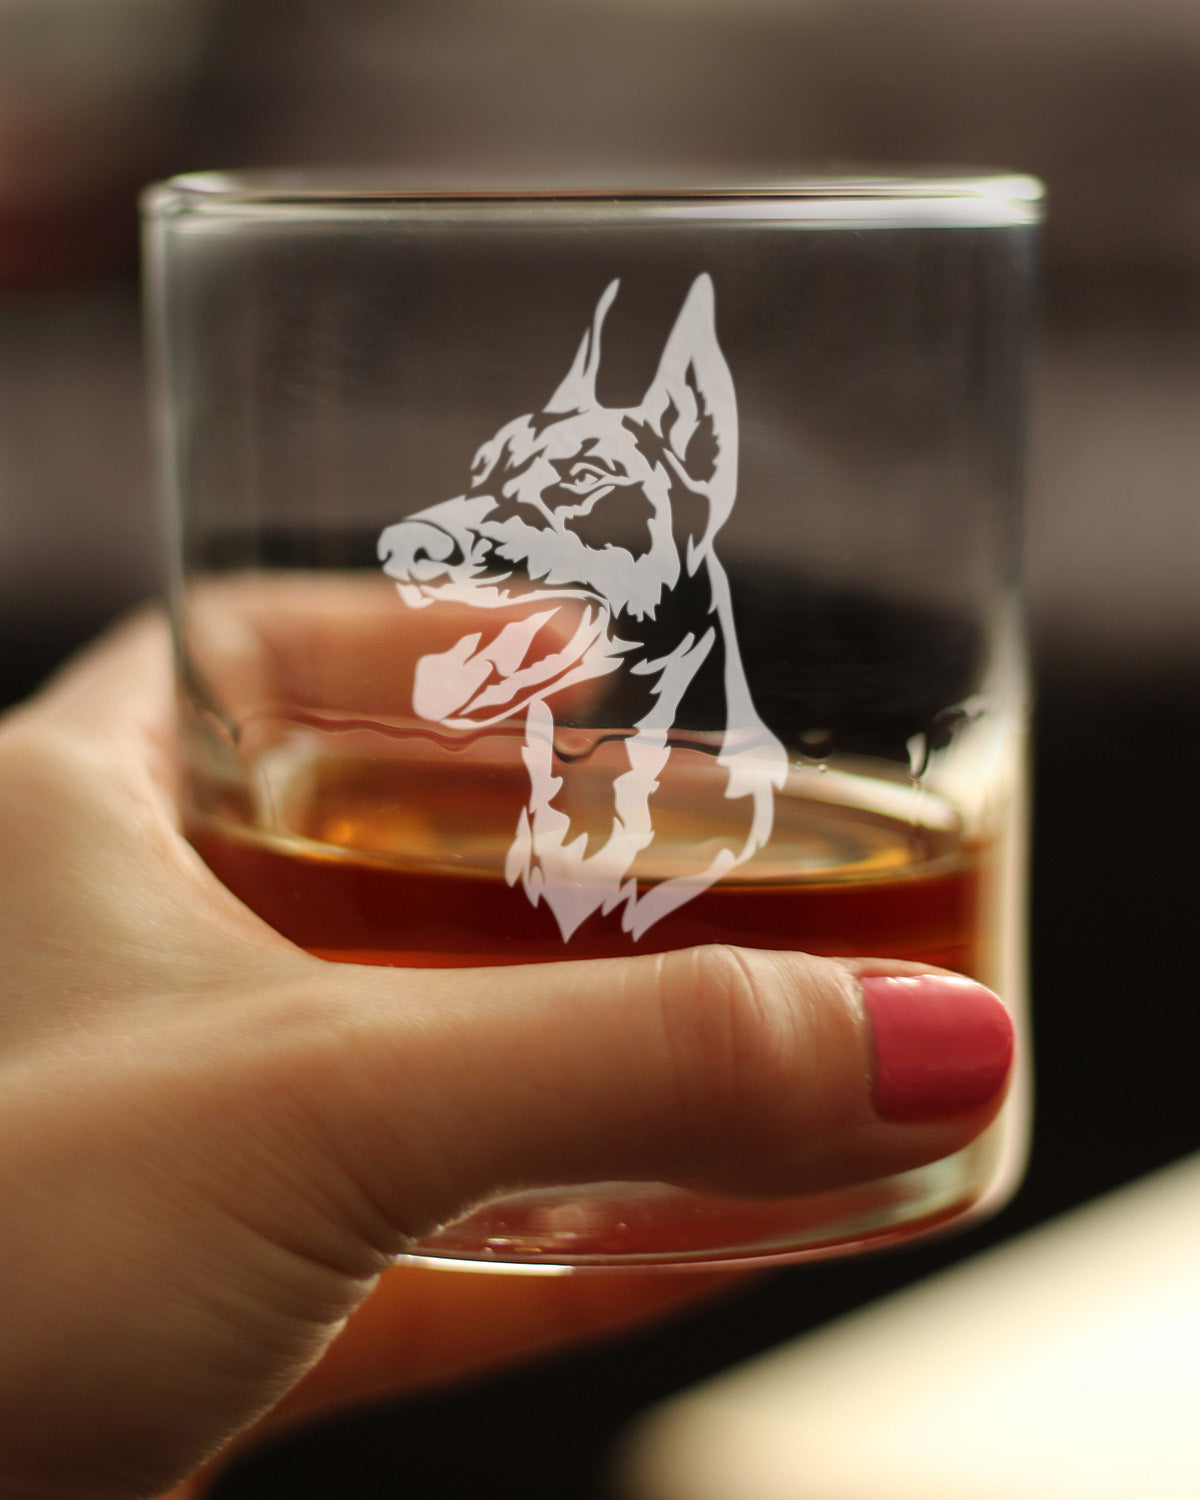 Doberman Face Whiskey Rocks Glass - Unique Dog Themed Decor and Gifts for Moms &amp; Dads of Pinscher Dobermans - 10.25 Oz